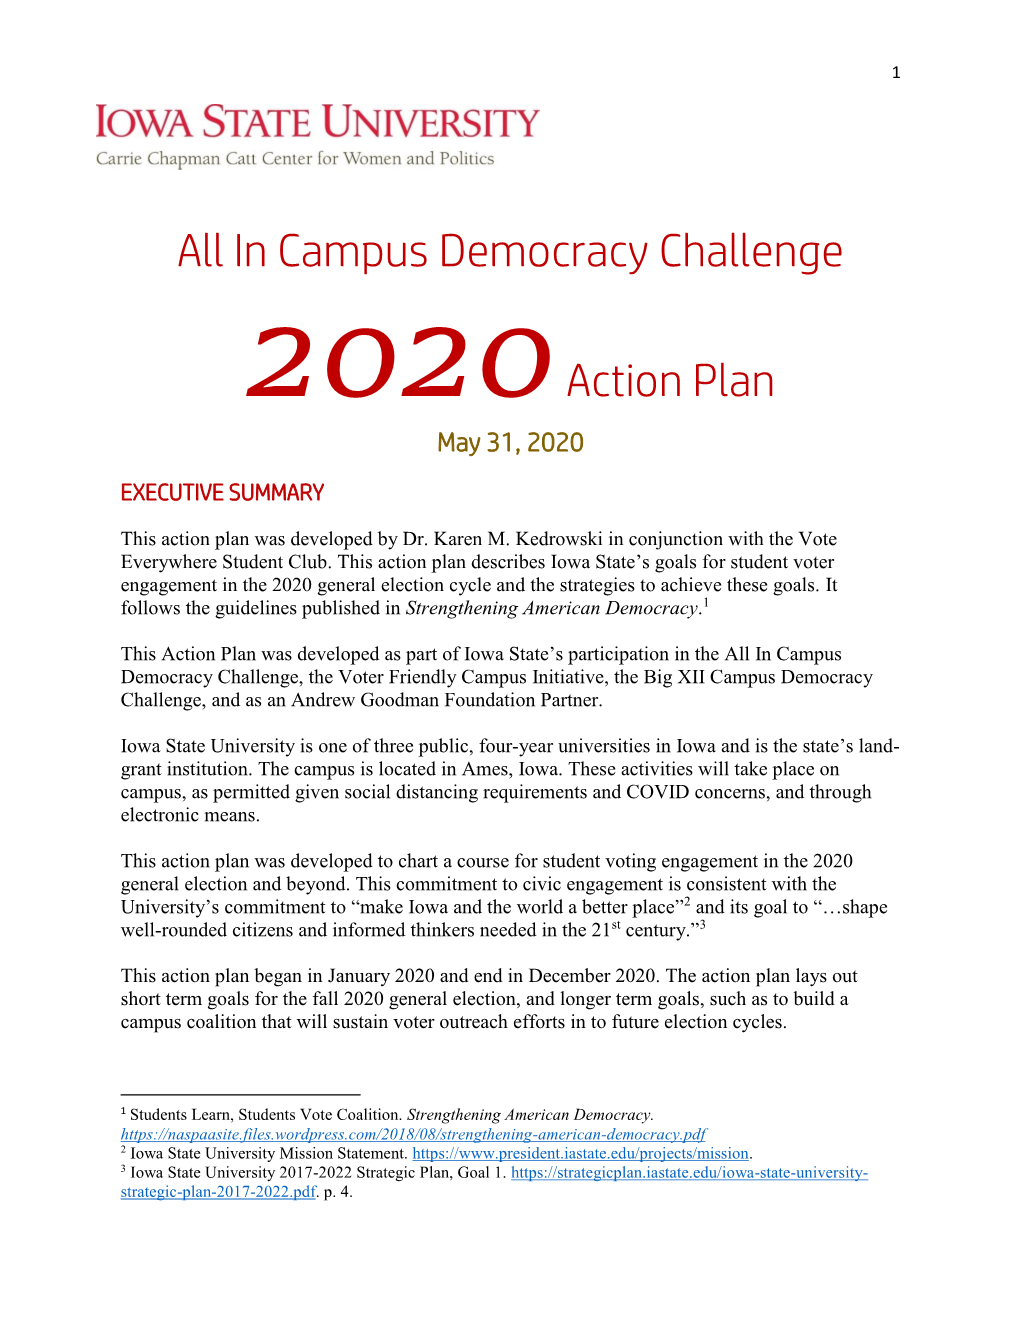 All in Campus Democracy Challenge 2020Action Plan